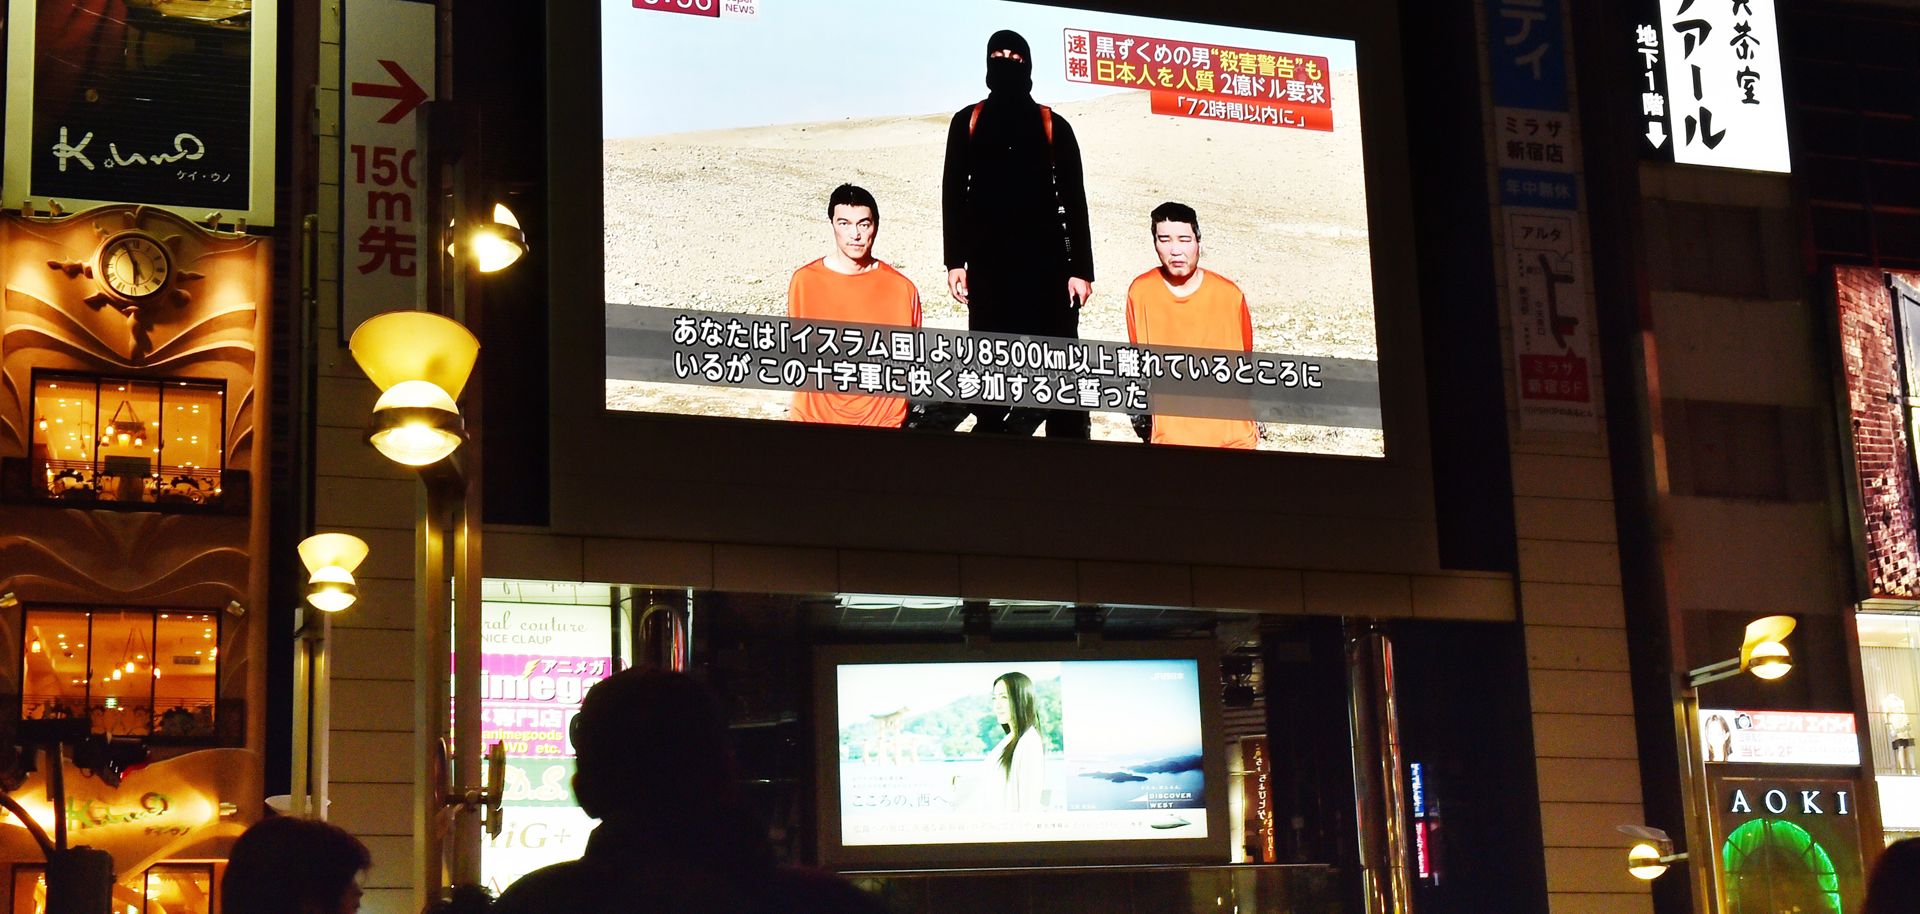 An Islamic State Kidnapping Reveals Japan's Vulnerabilities Abroad